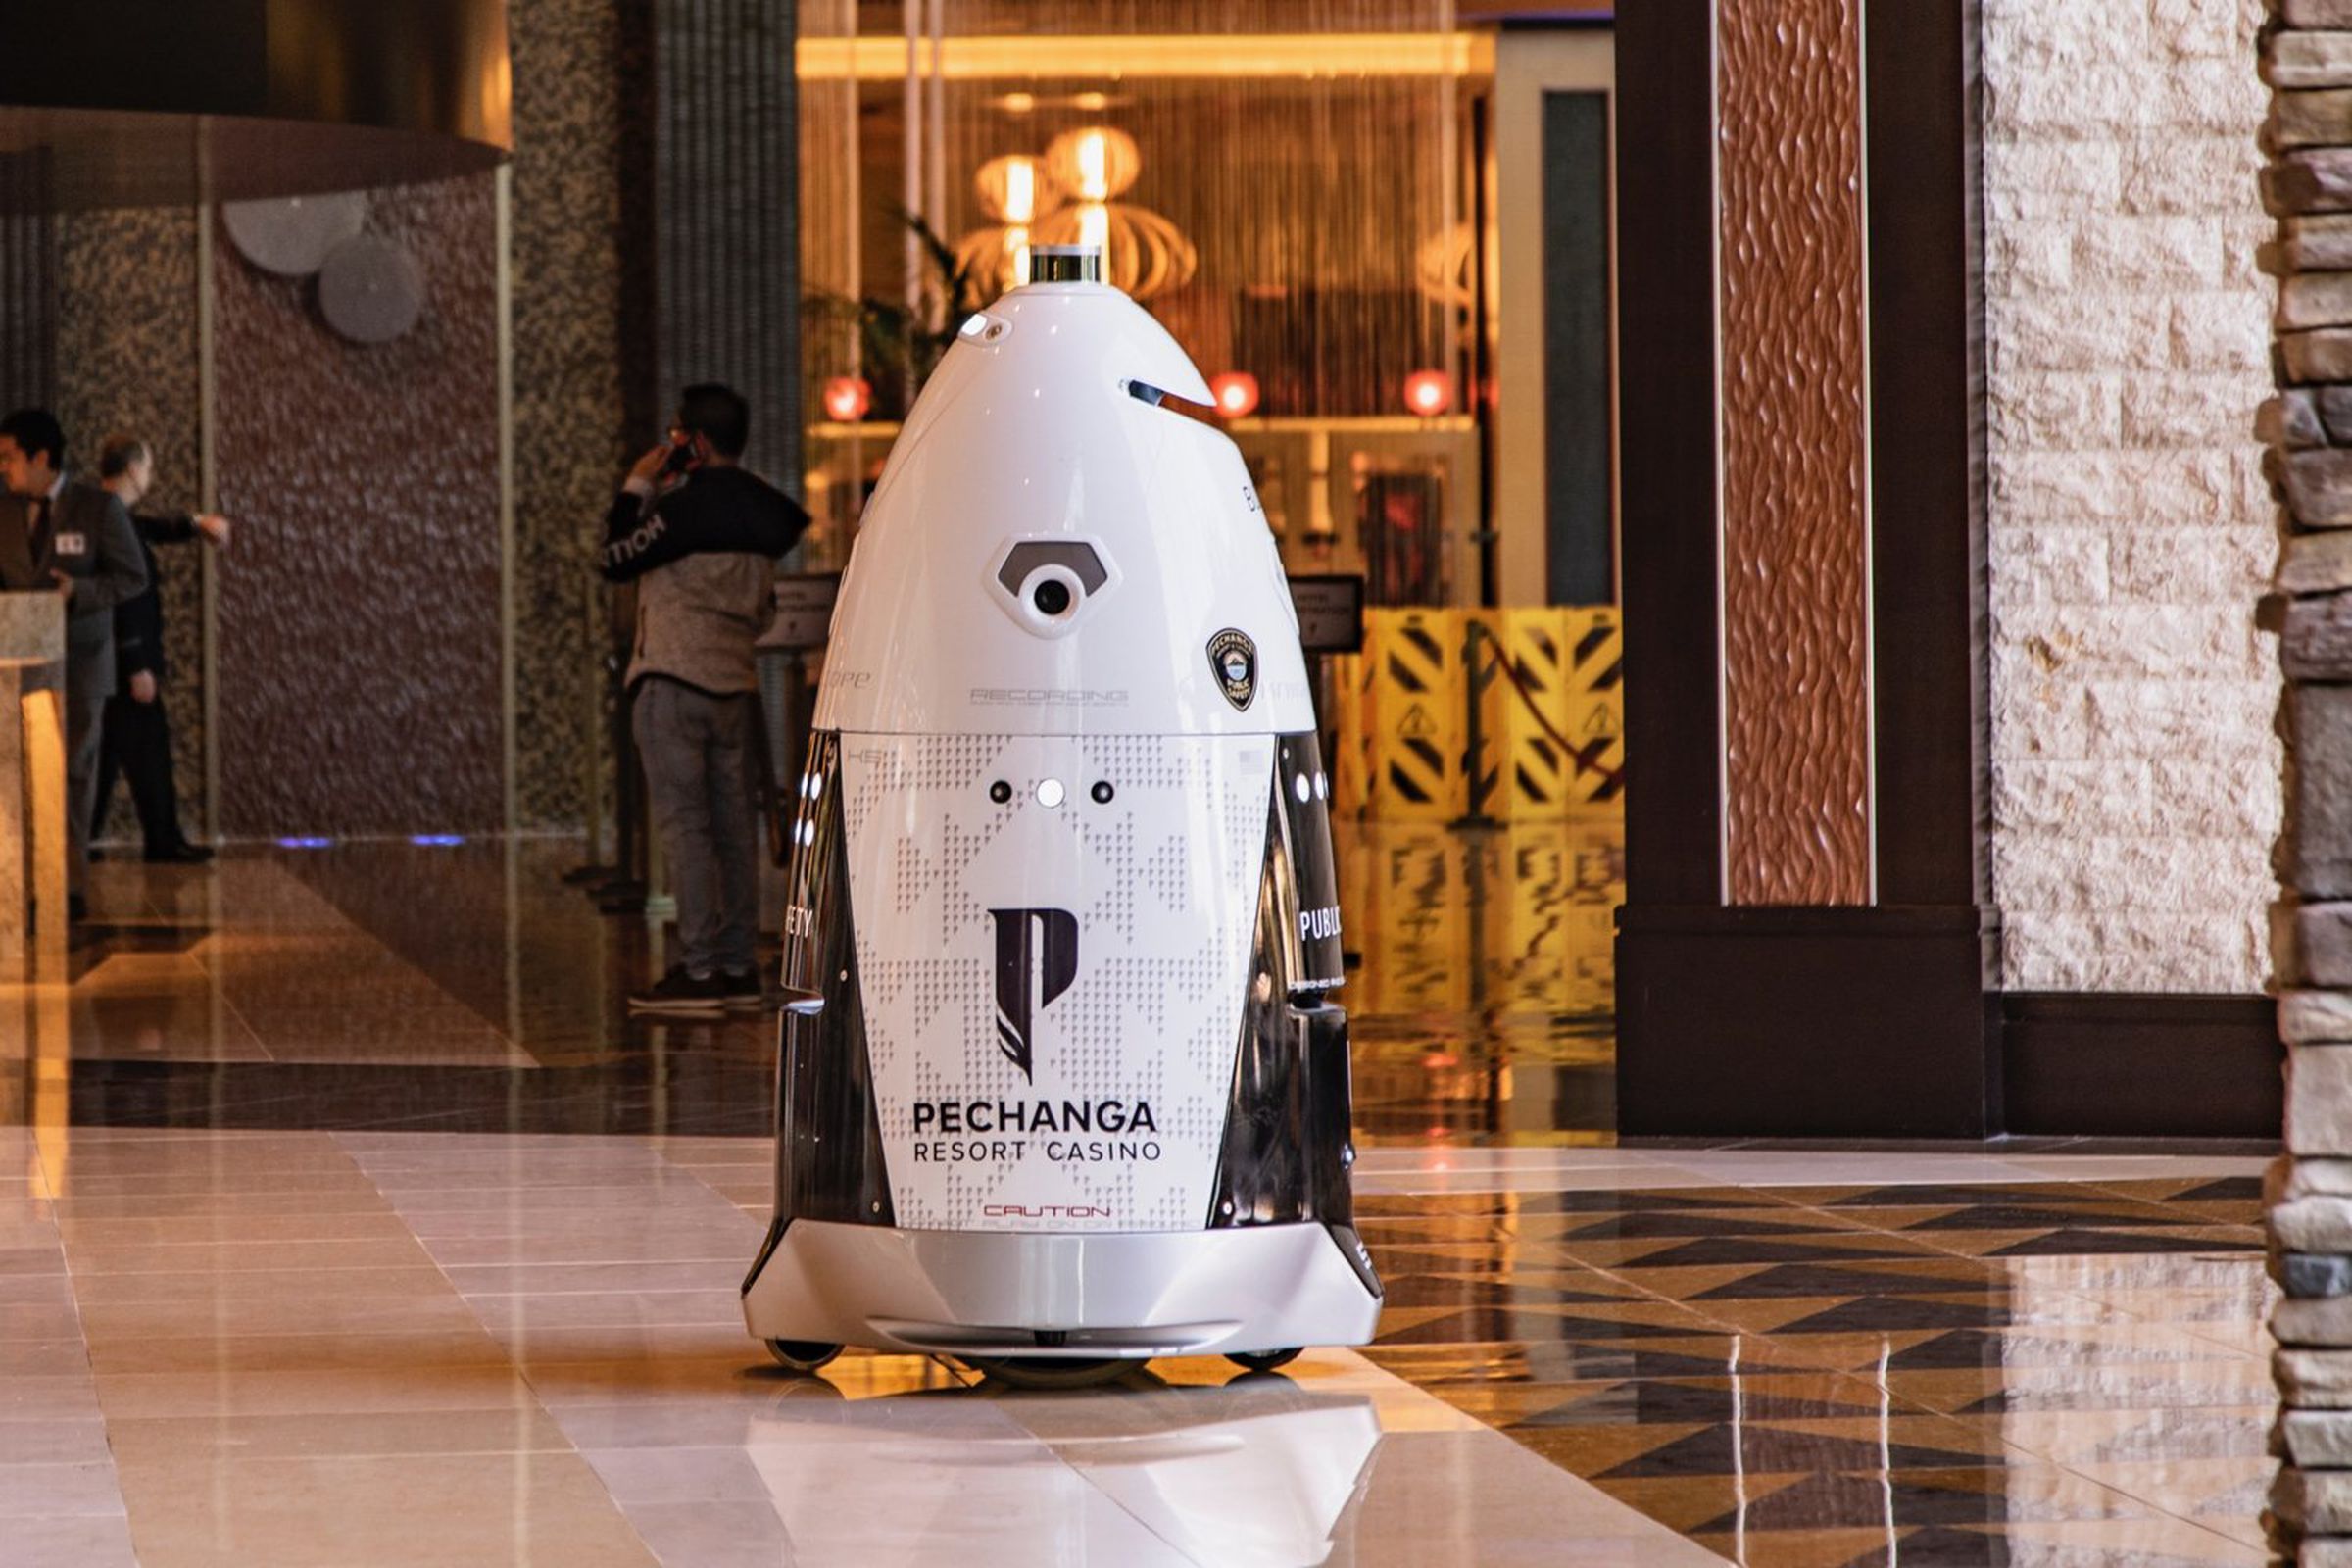 Knightscope’s robots are leased out to patrol hospitals, casinos, and other large buildings.